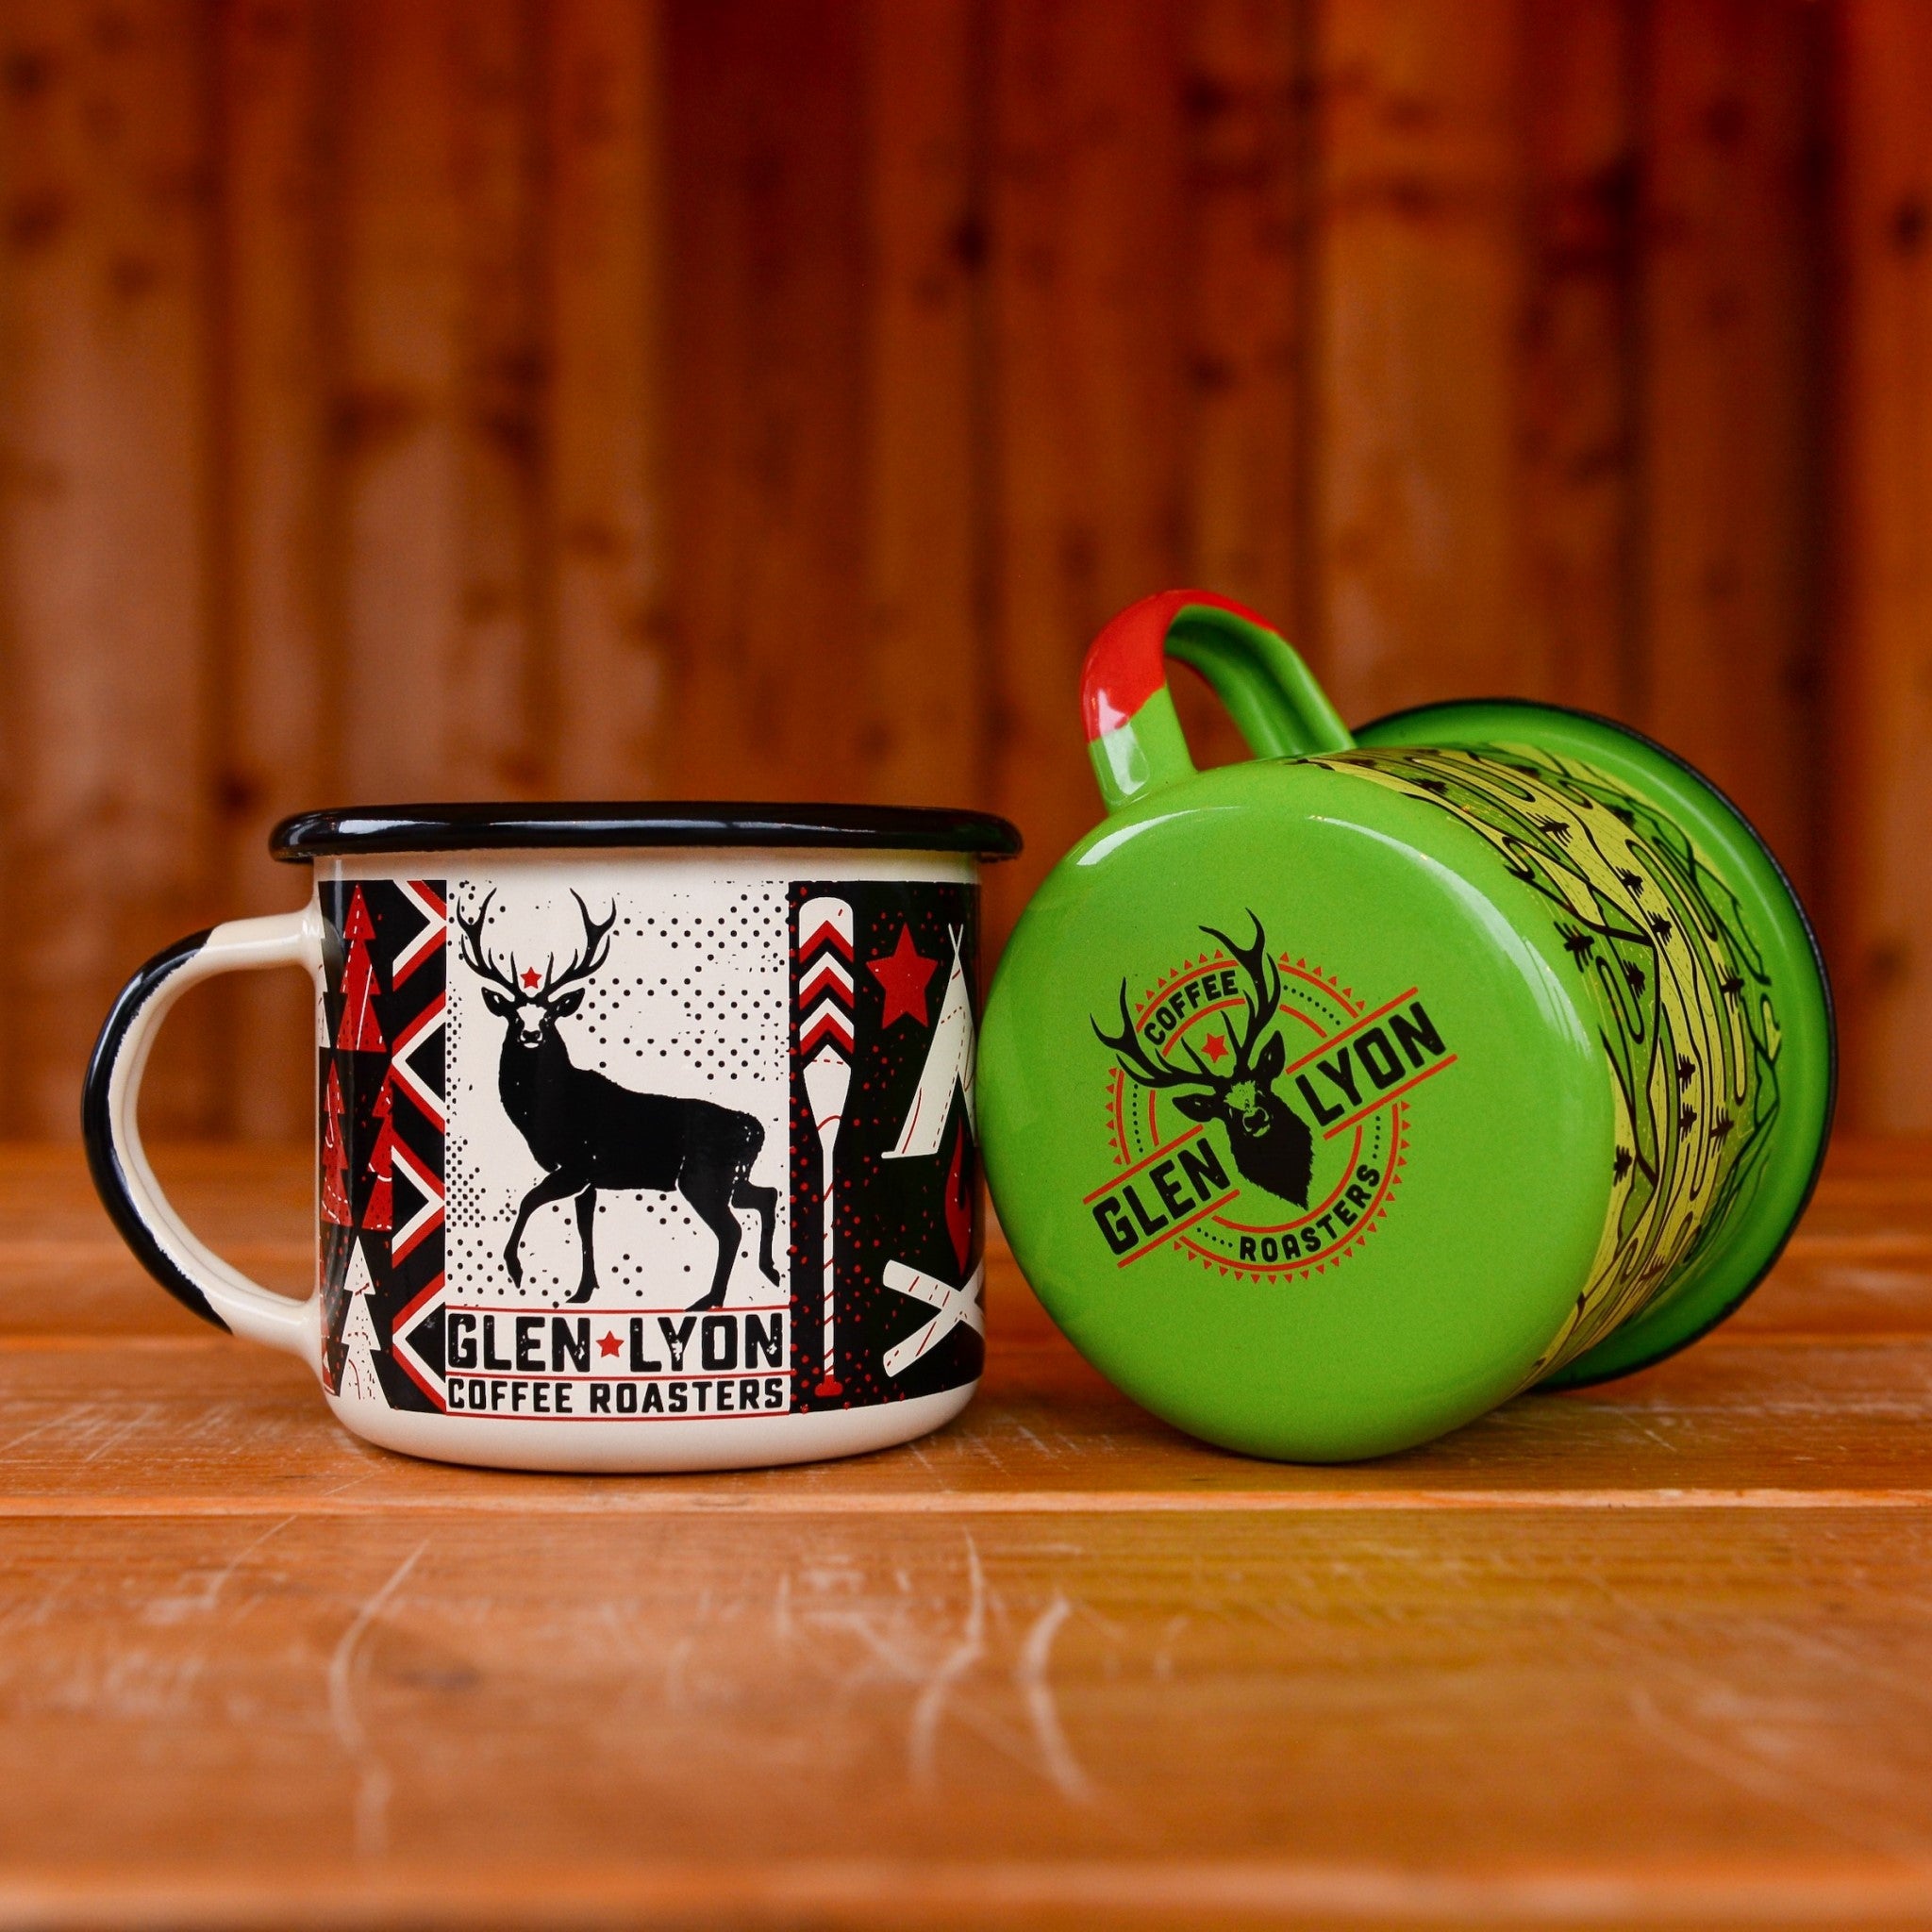 Two different coloured Glen Lyon Coffee Roasters enamel camp mugs on a wooden table, the green one on its side to reveal the Glen Lyon Coffee logo on the base